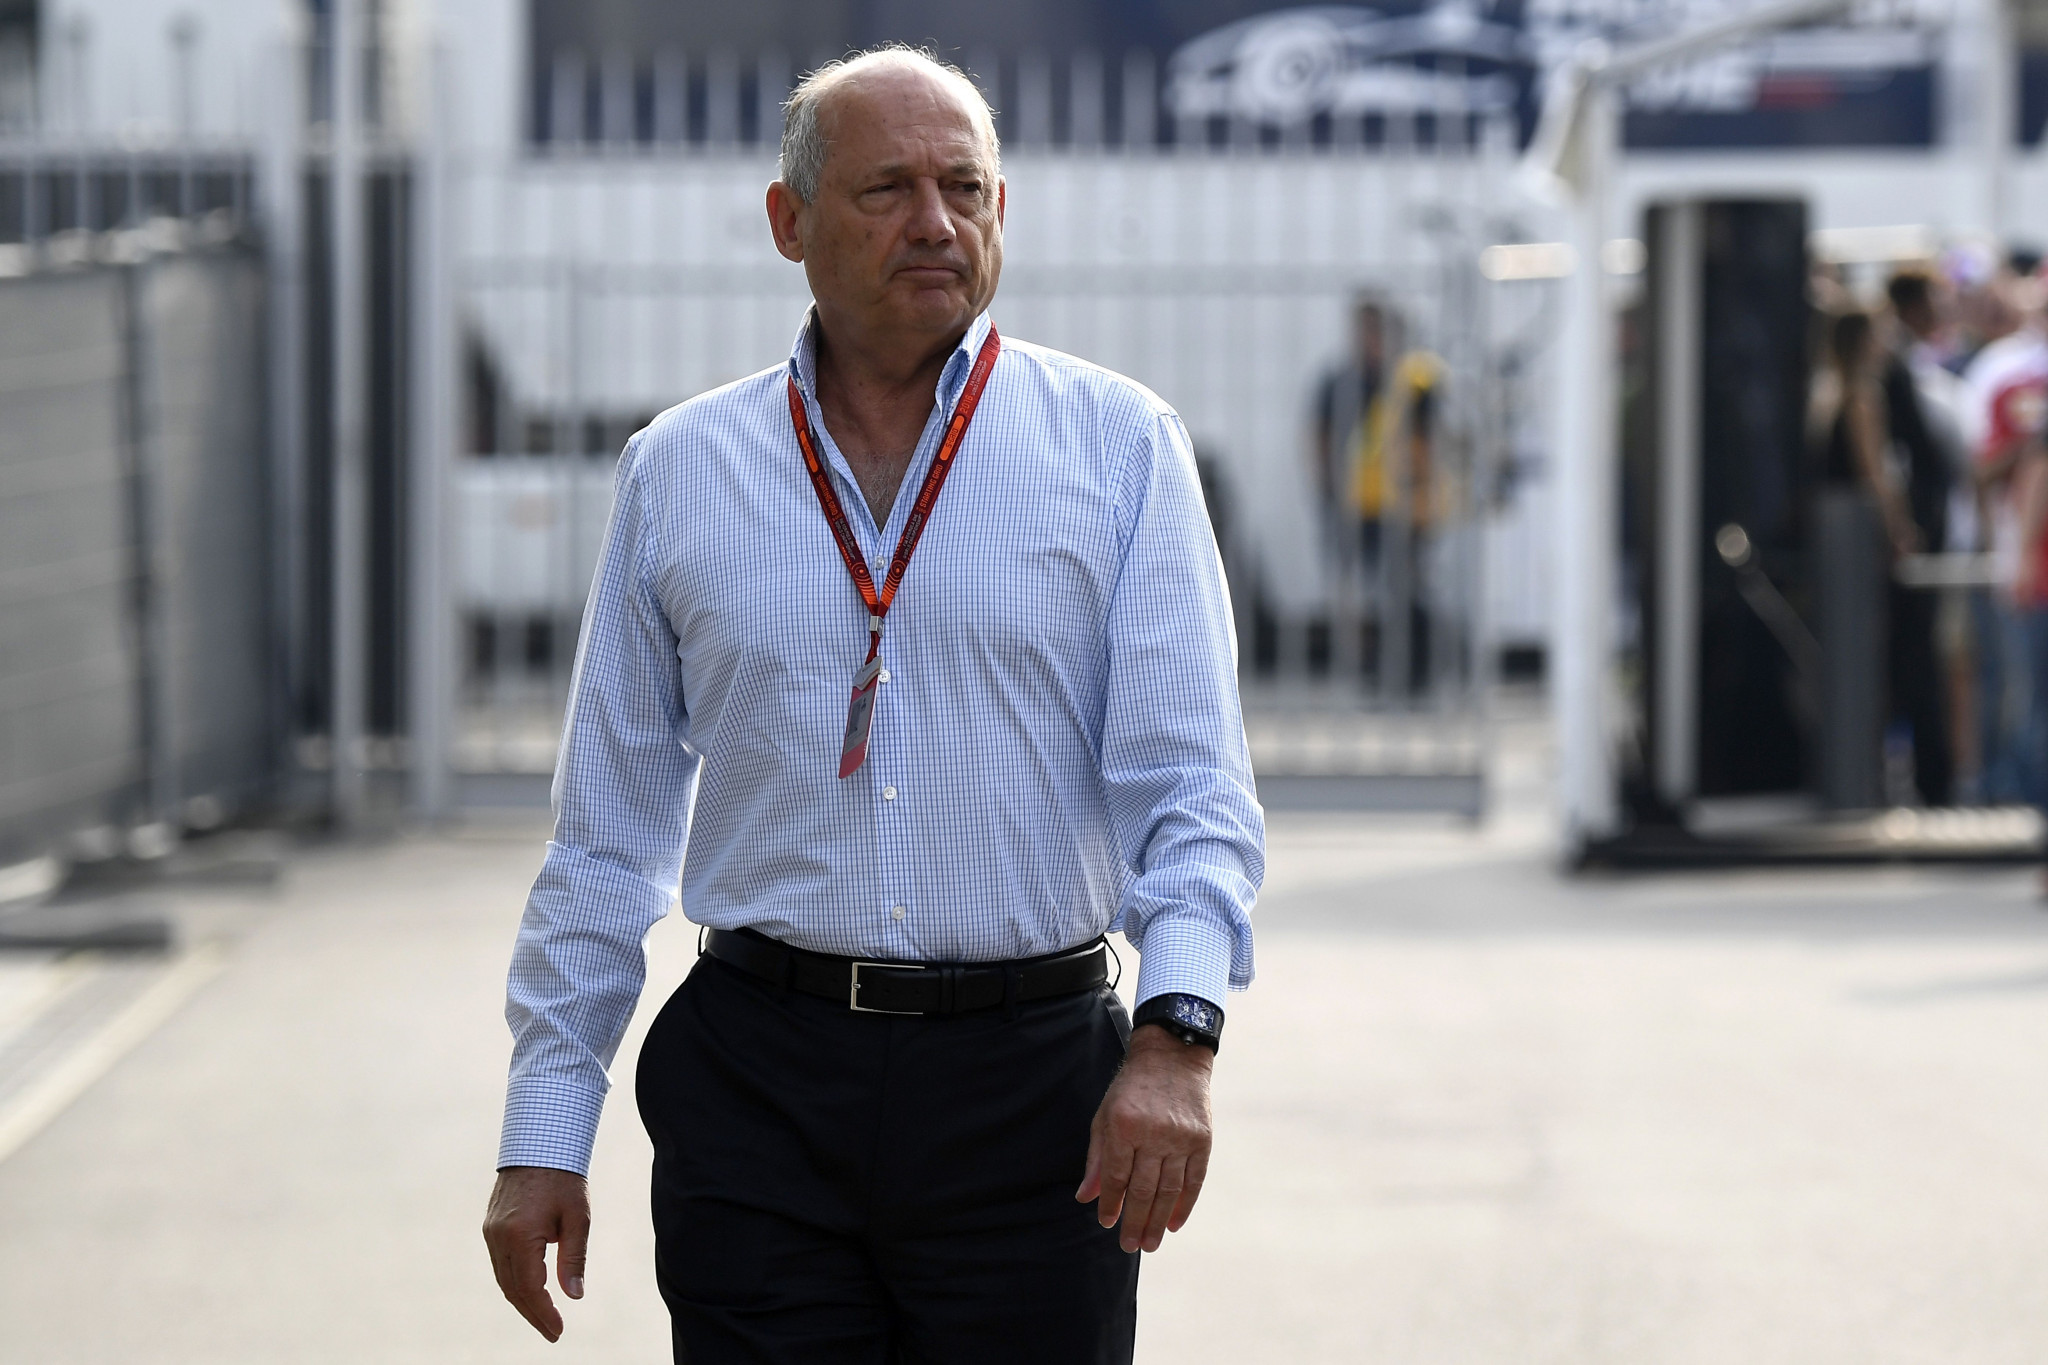 Ron Dennis said he feels passionate about safety in sport ©Getty Images